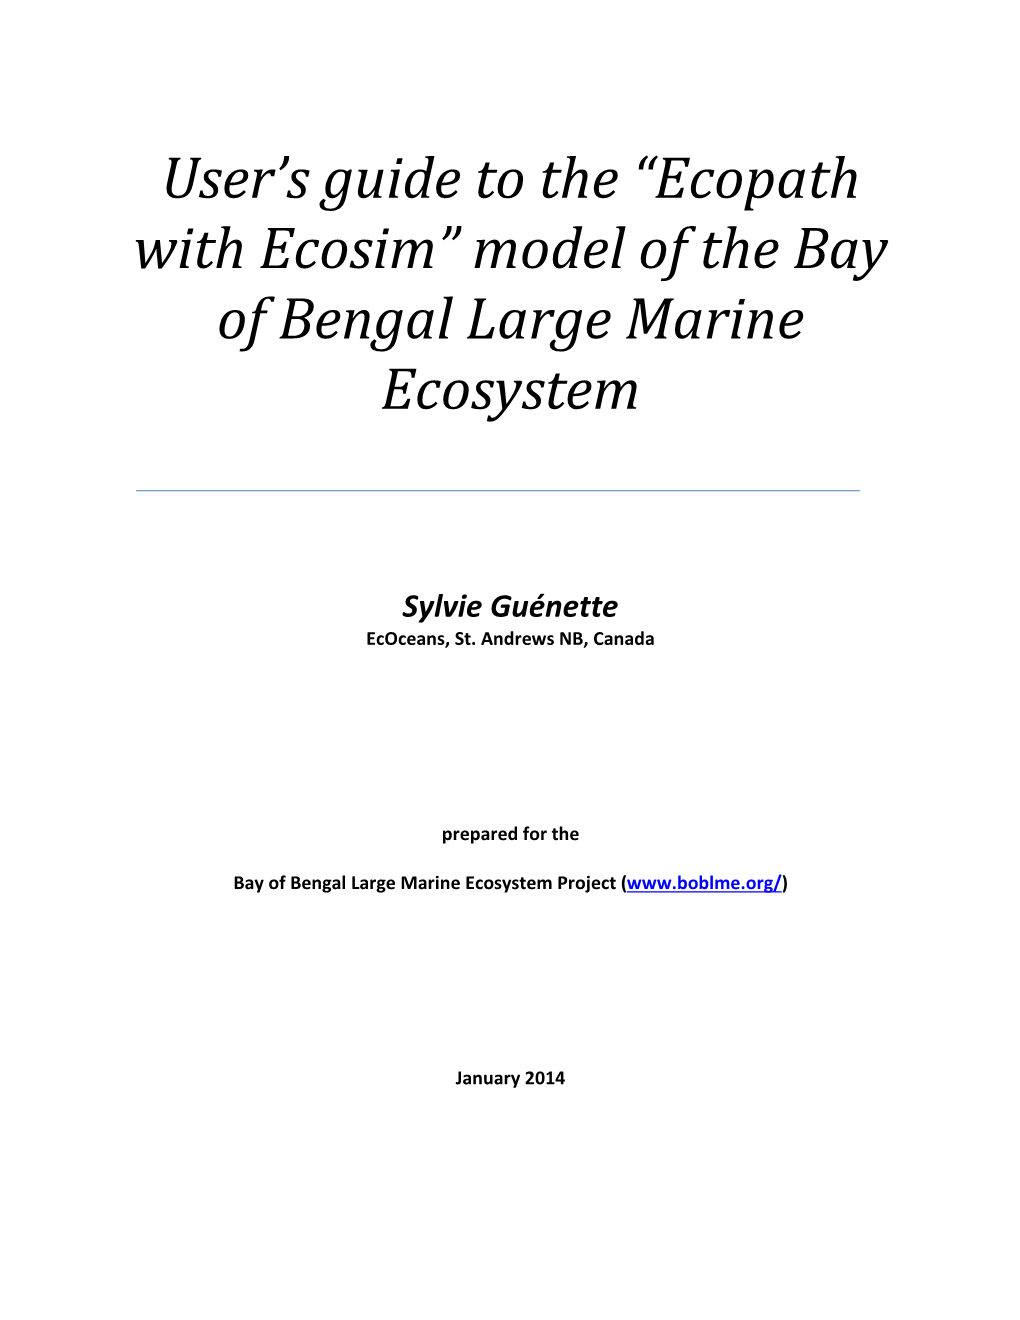 Ecopath with Ecosim” Model of the Bay of Bengal Large Marine